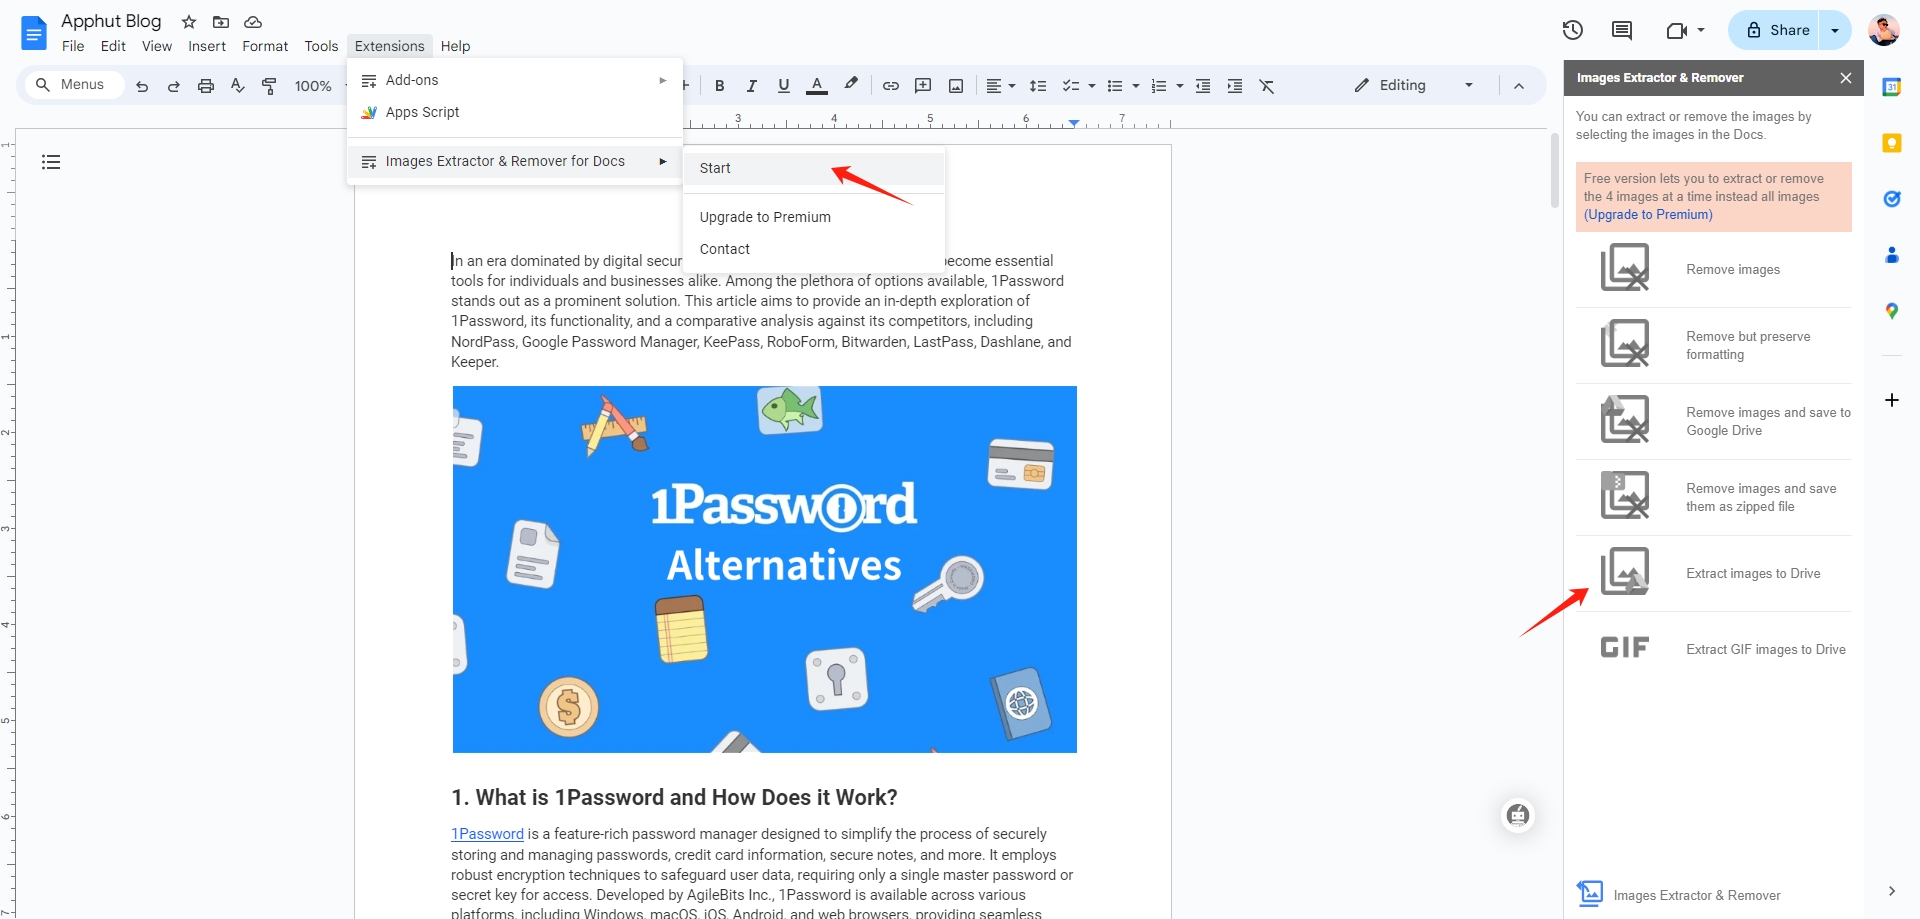 google docs download images with extension